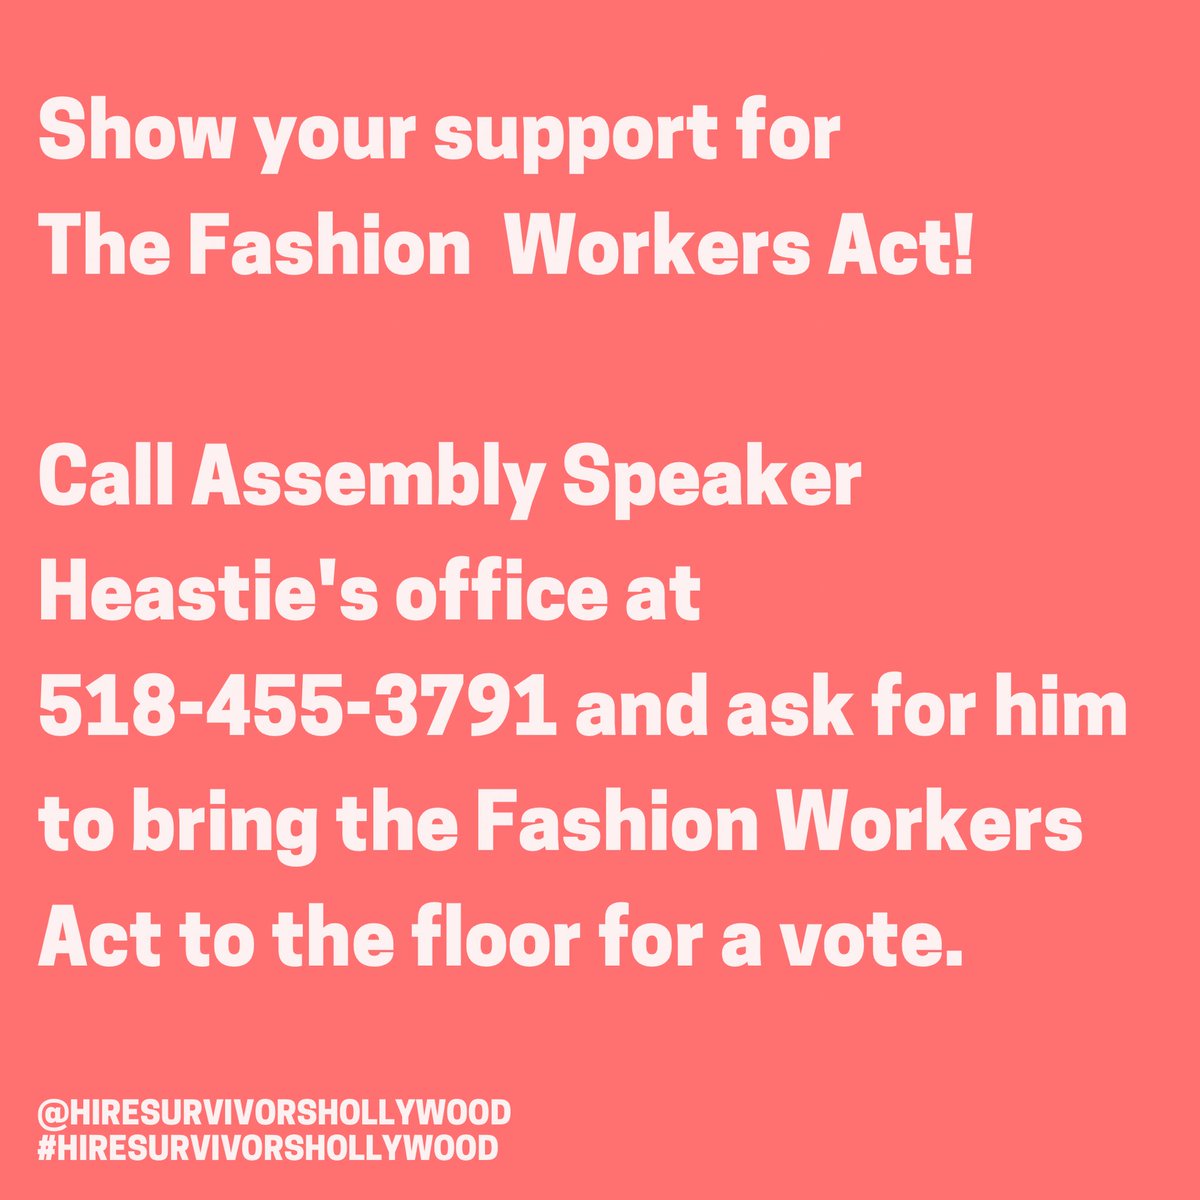 The #FashionWorkersAct has just passed in the NY Senate with a resounding vote of 46-16! We extend our heartfelt gratitude to Senator Brad Hoylman, the bill sponsor, for his outstanding leadership.